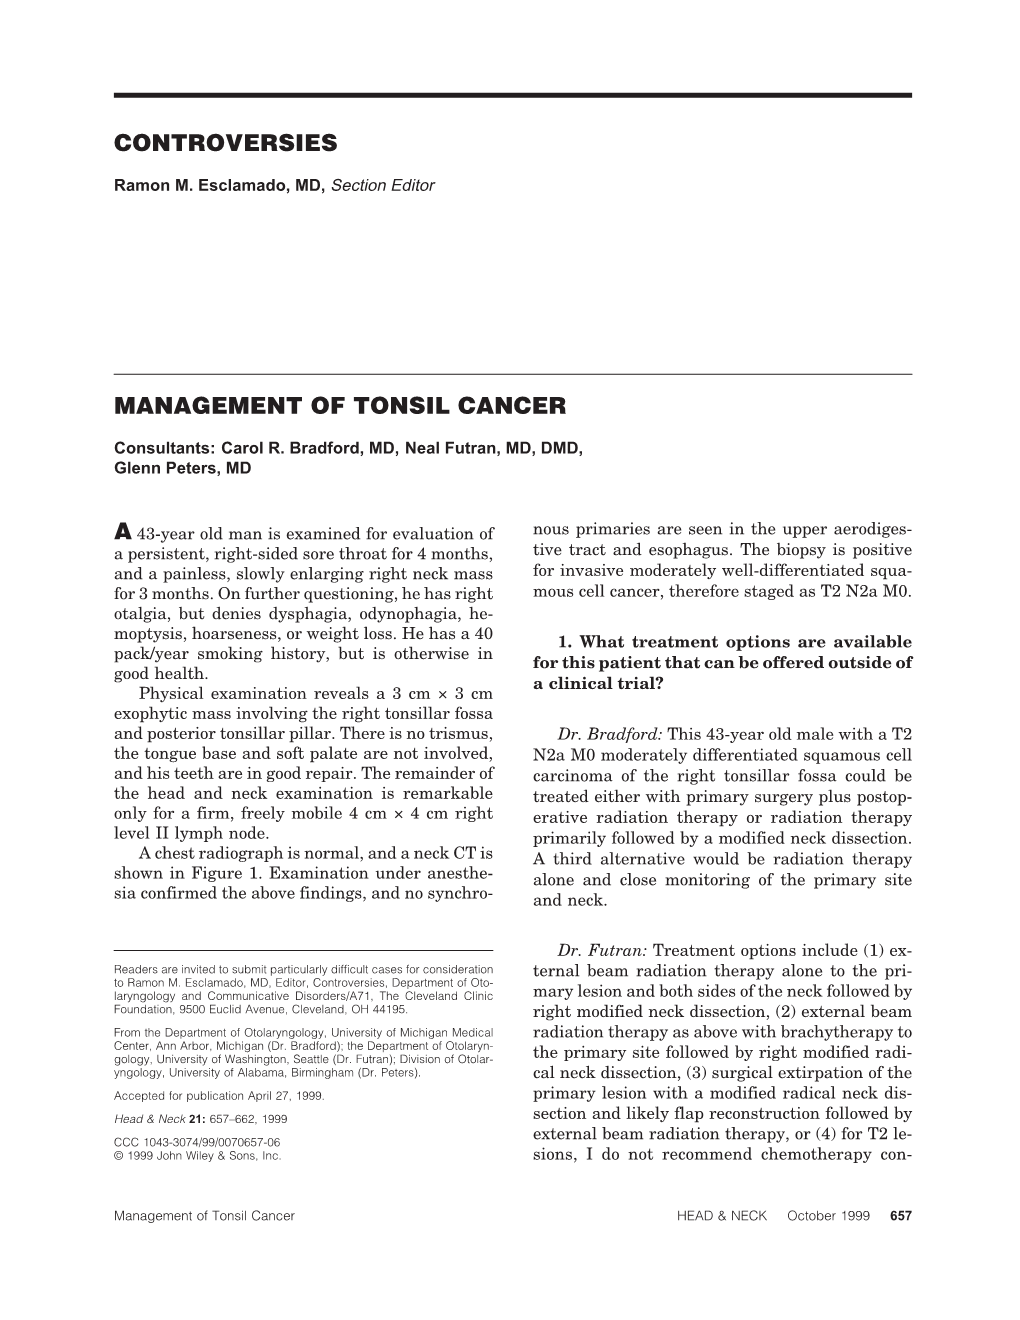 Controversies Management of Tonsil Cancer